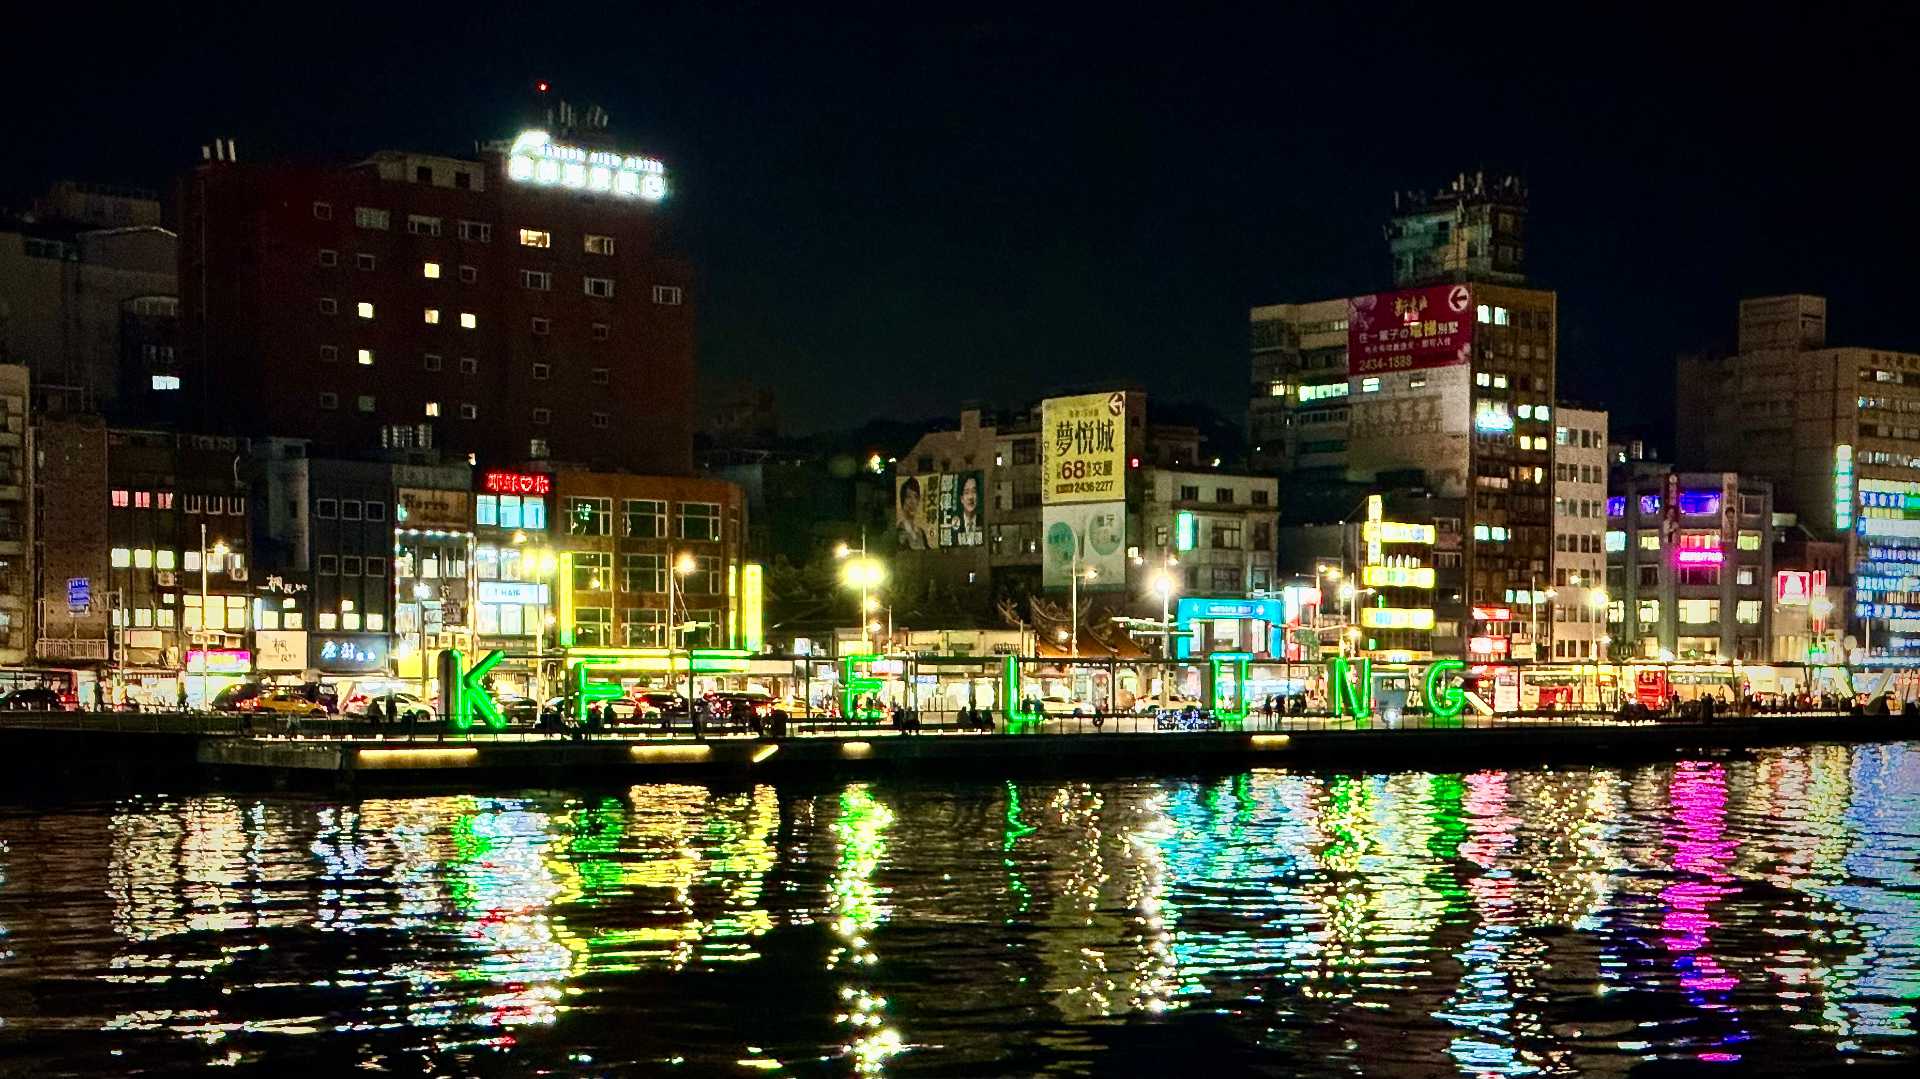 Night-time view of lights reflecting in Keelung Harbor. The letters K-E-E-L-U-N-G, each approximately one-story-tall, are illuminated on the far side of the harbor.